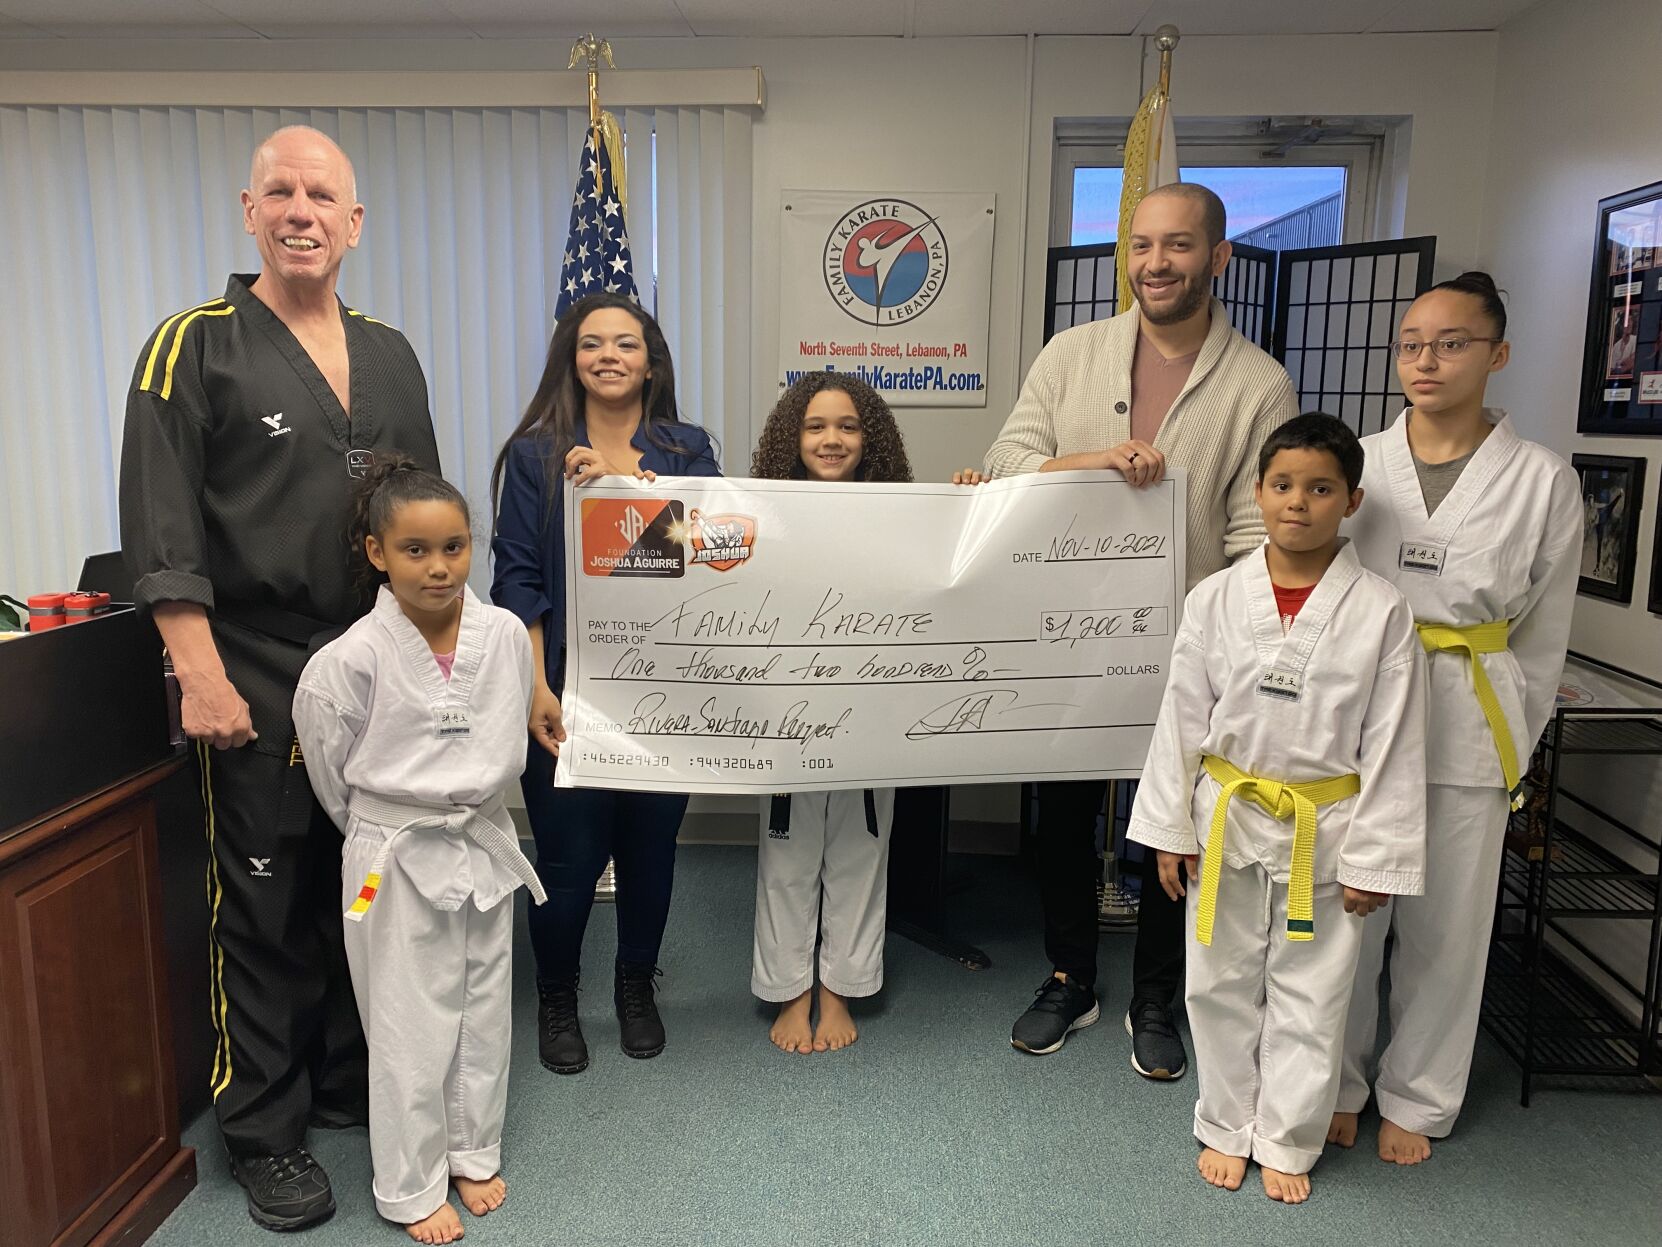 Joshua Aguirre Foundation debuts with $1,200 donation to Lebanon Family Karate students Community News lancasteronline